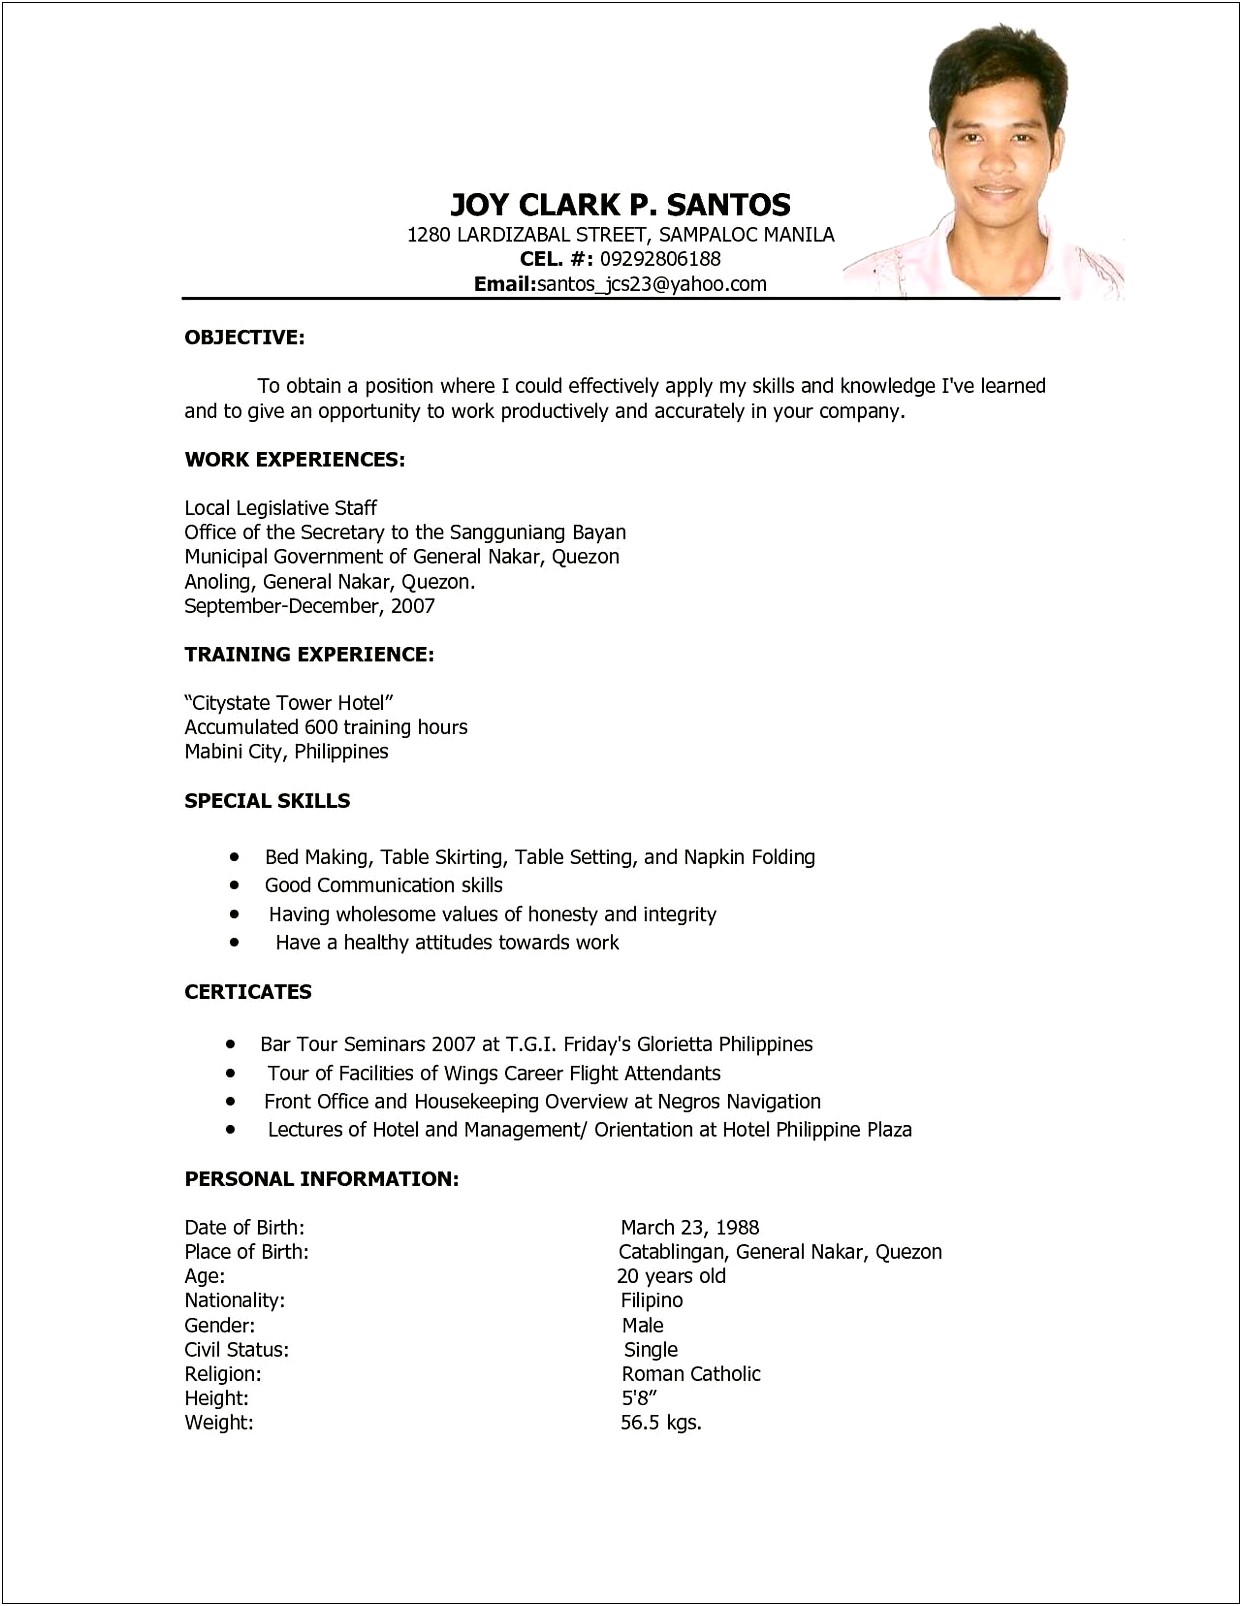 Resume Format In Word For Hotel Management Fresher